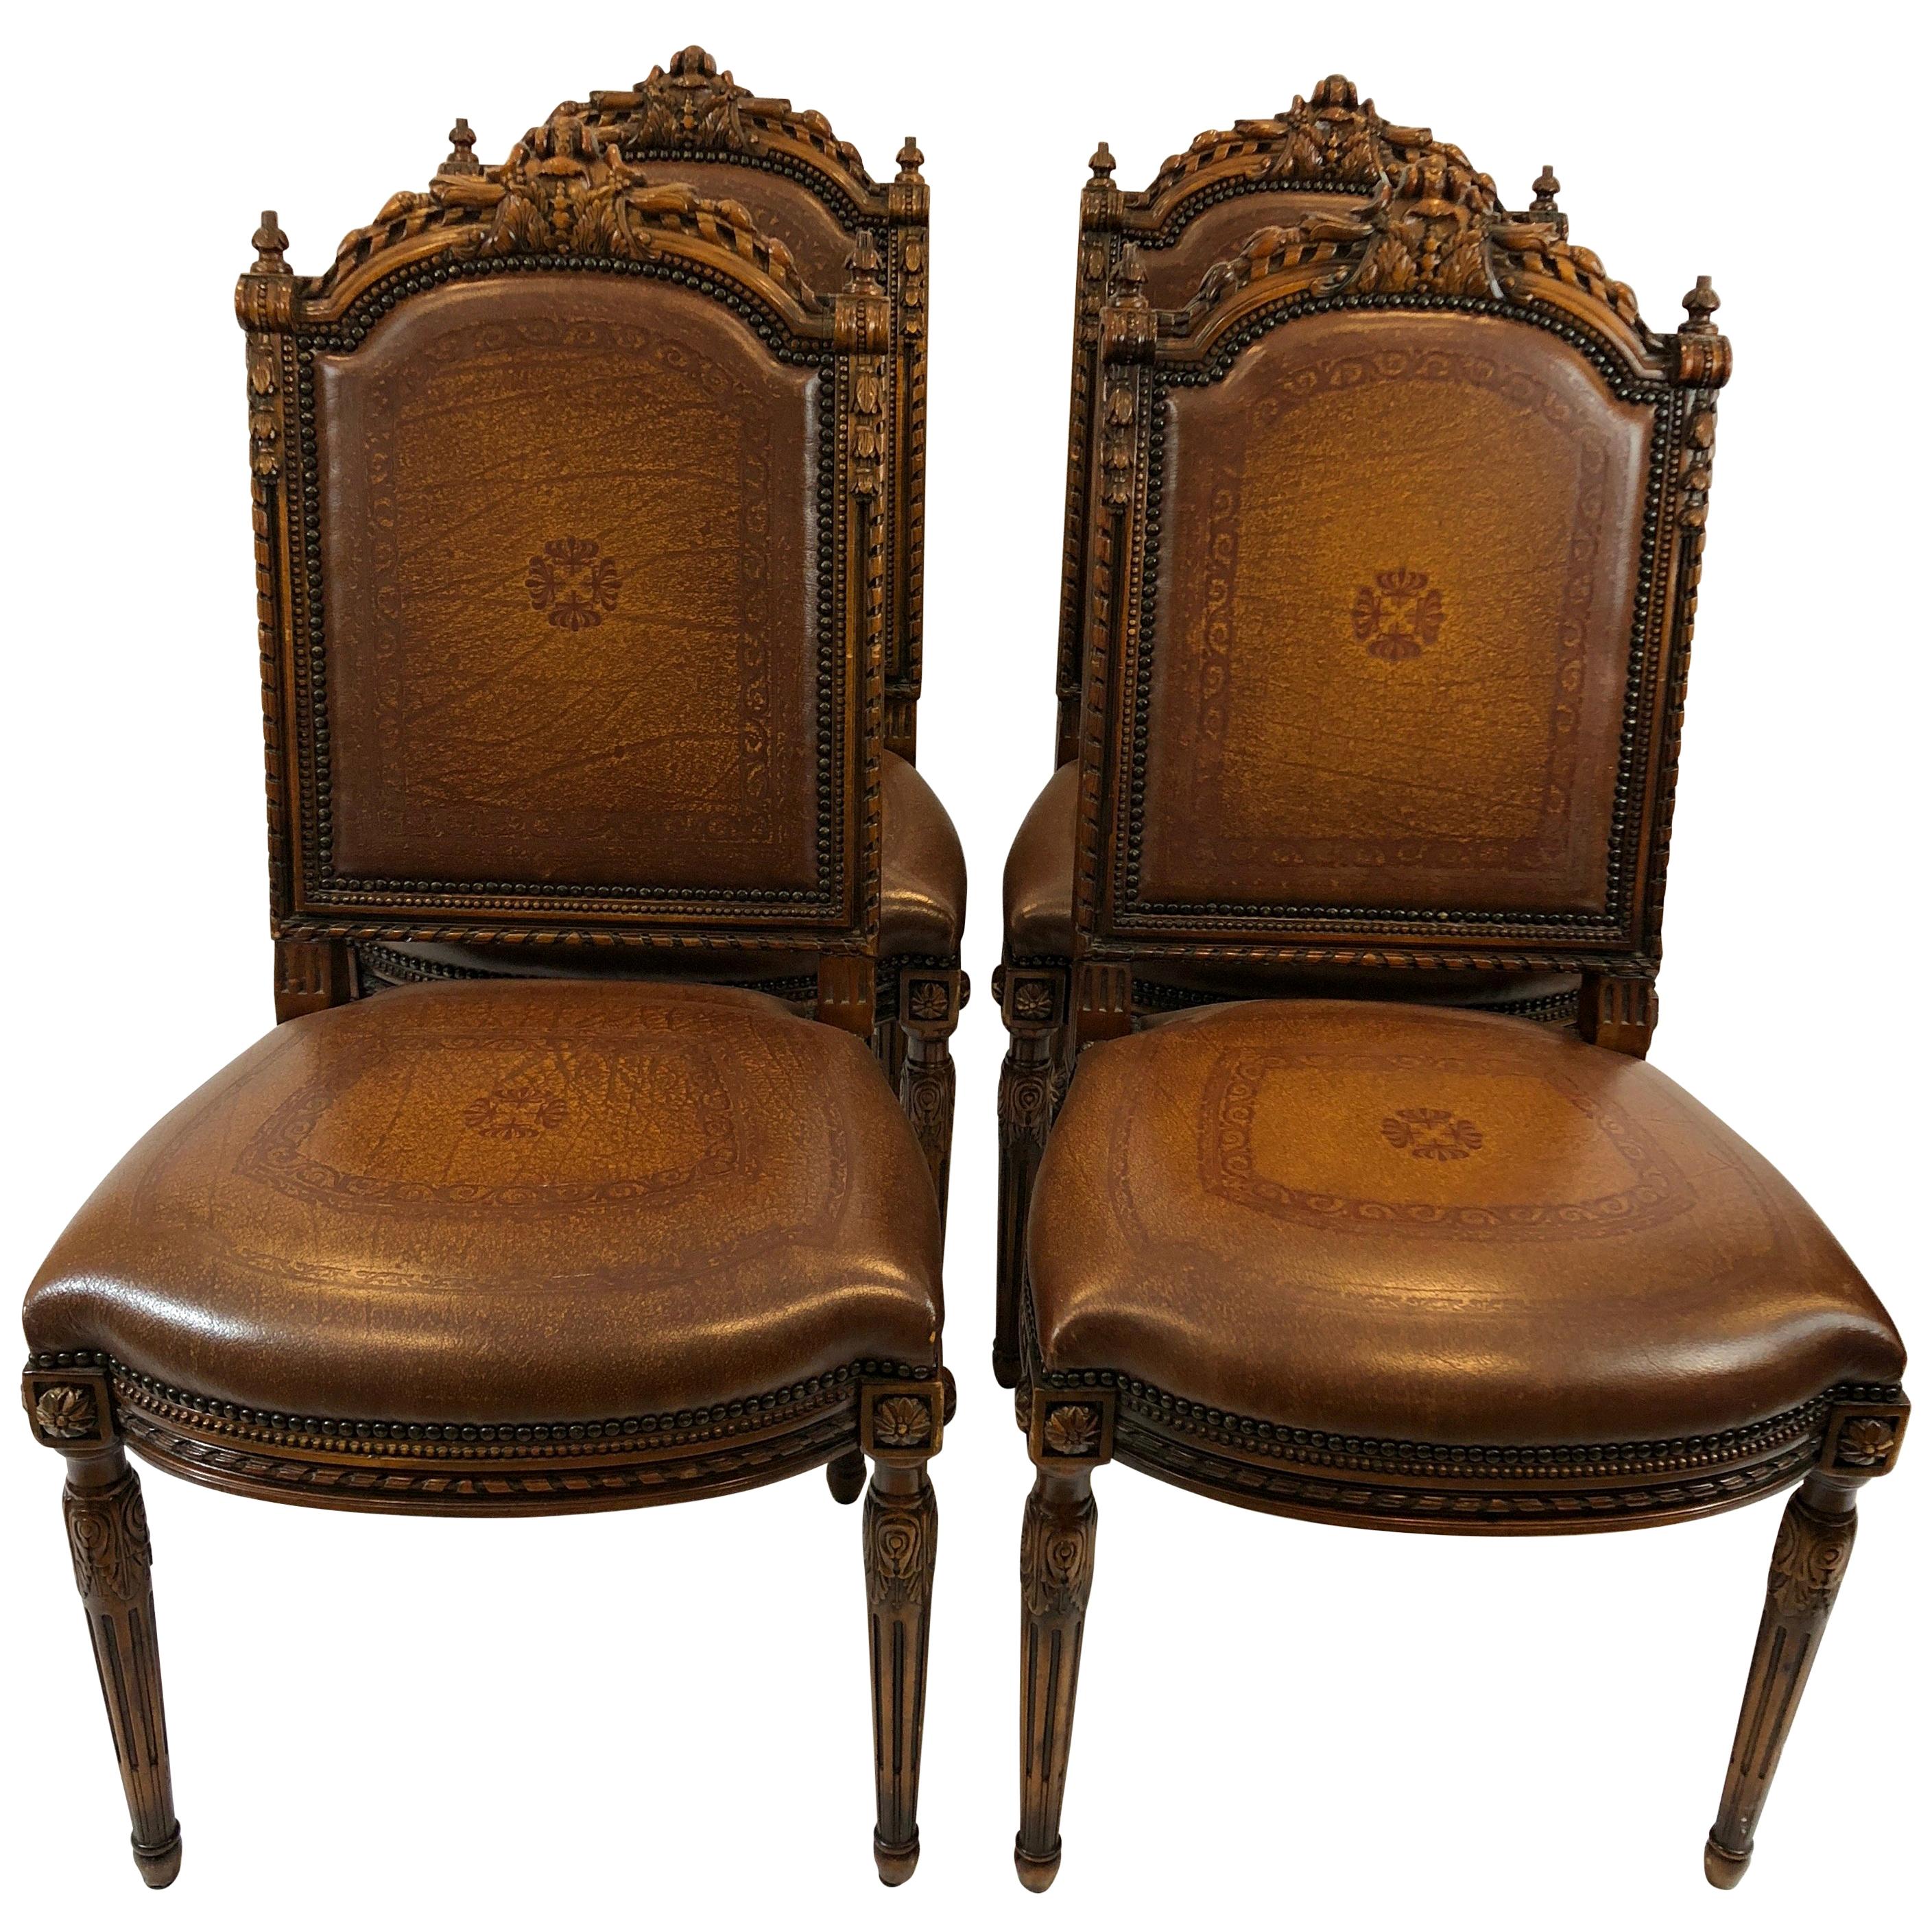 Grand Set of 4 Theodore Alexander Carved Walnut and Leather Side Dining Chairs